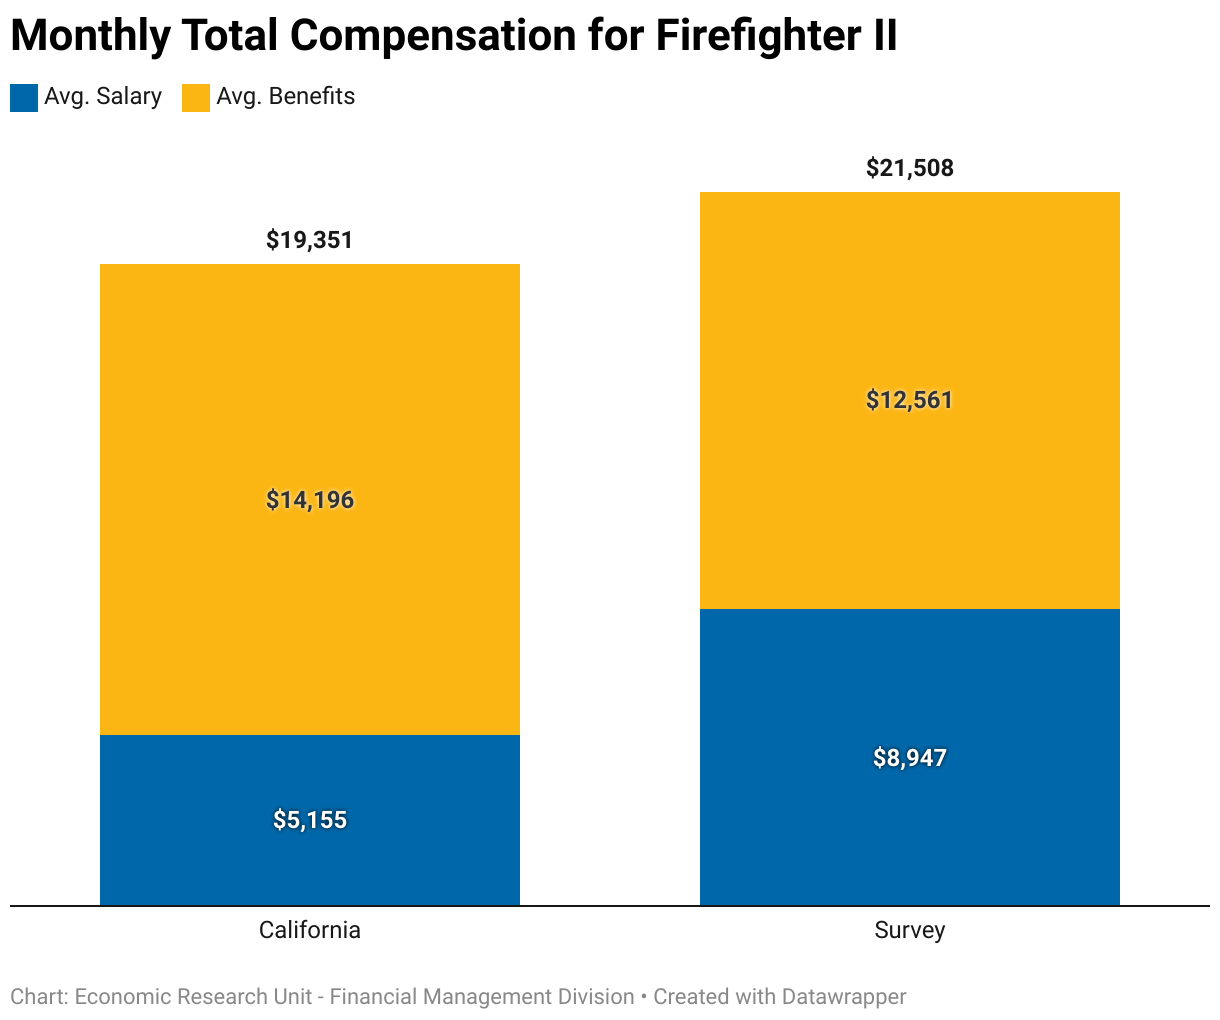 This chart compares the average monthly compensation for Firefighter II across State and local firefighters. The average monthly compensation for State firefighters was $19,351 ($5,155 in salary and $14,196 in benefits). The average monthly compensation for local fighters was $21,508 ($8,947 in salary and $12,561 in benefits).